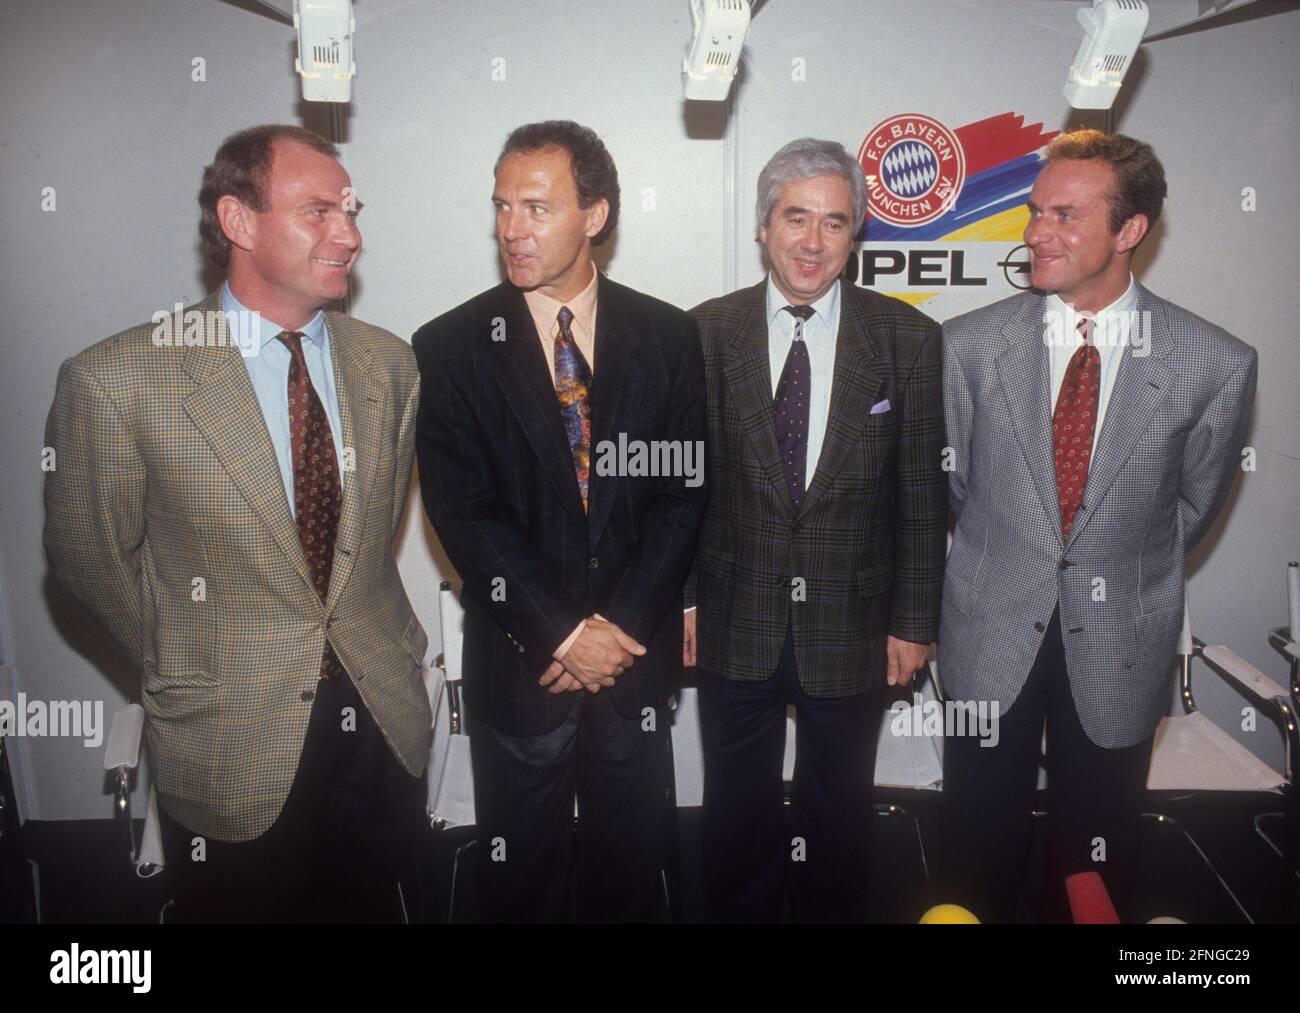 Hoeness beckenbauer rummenigge hi-res stock photography and images - Alamy